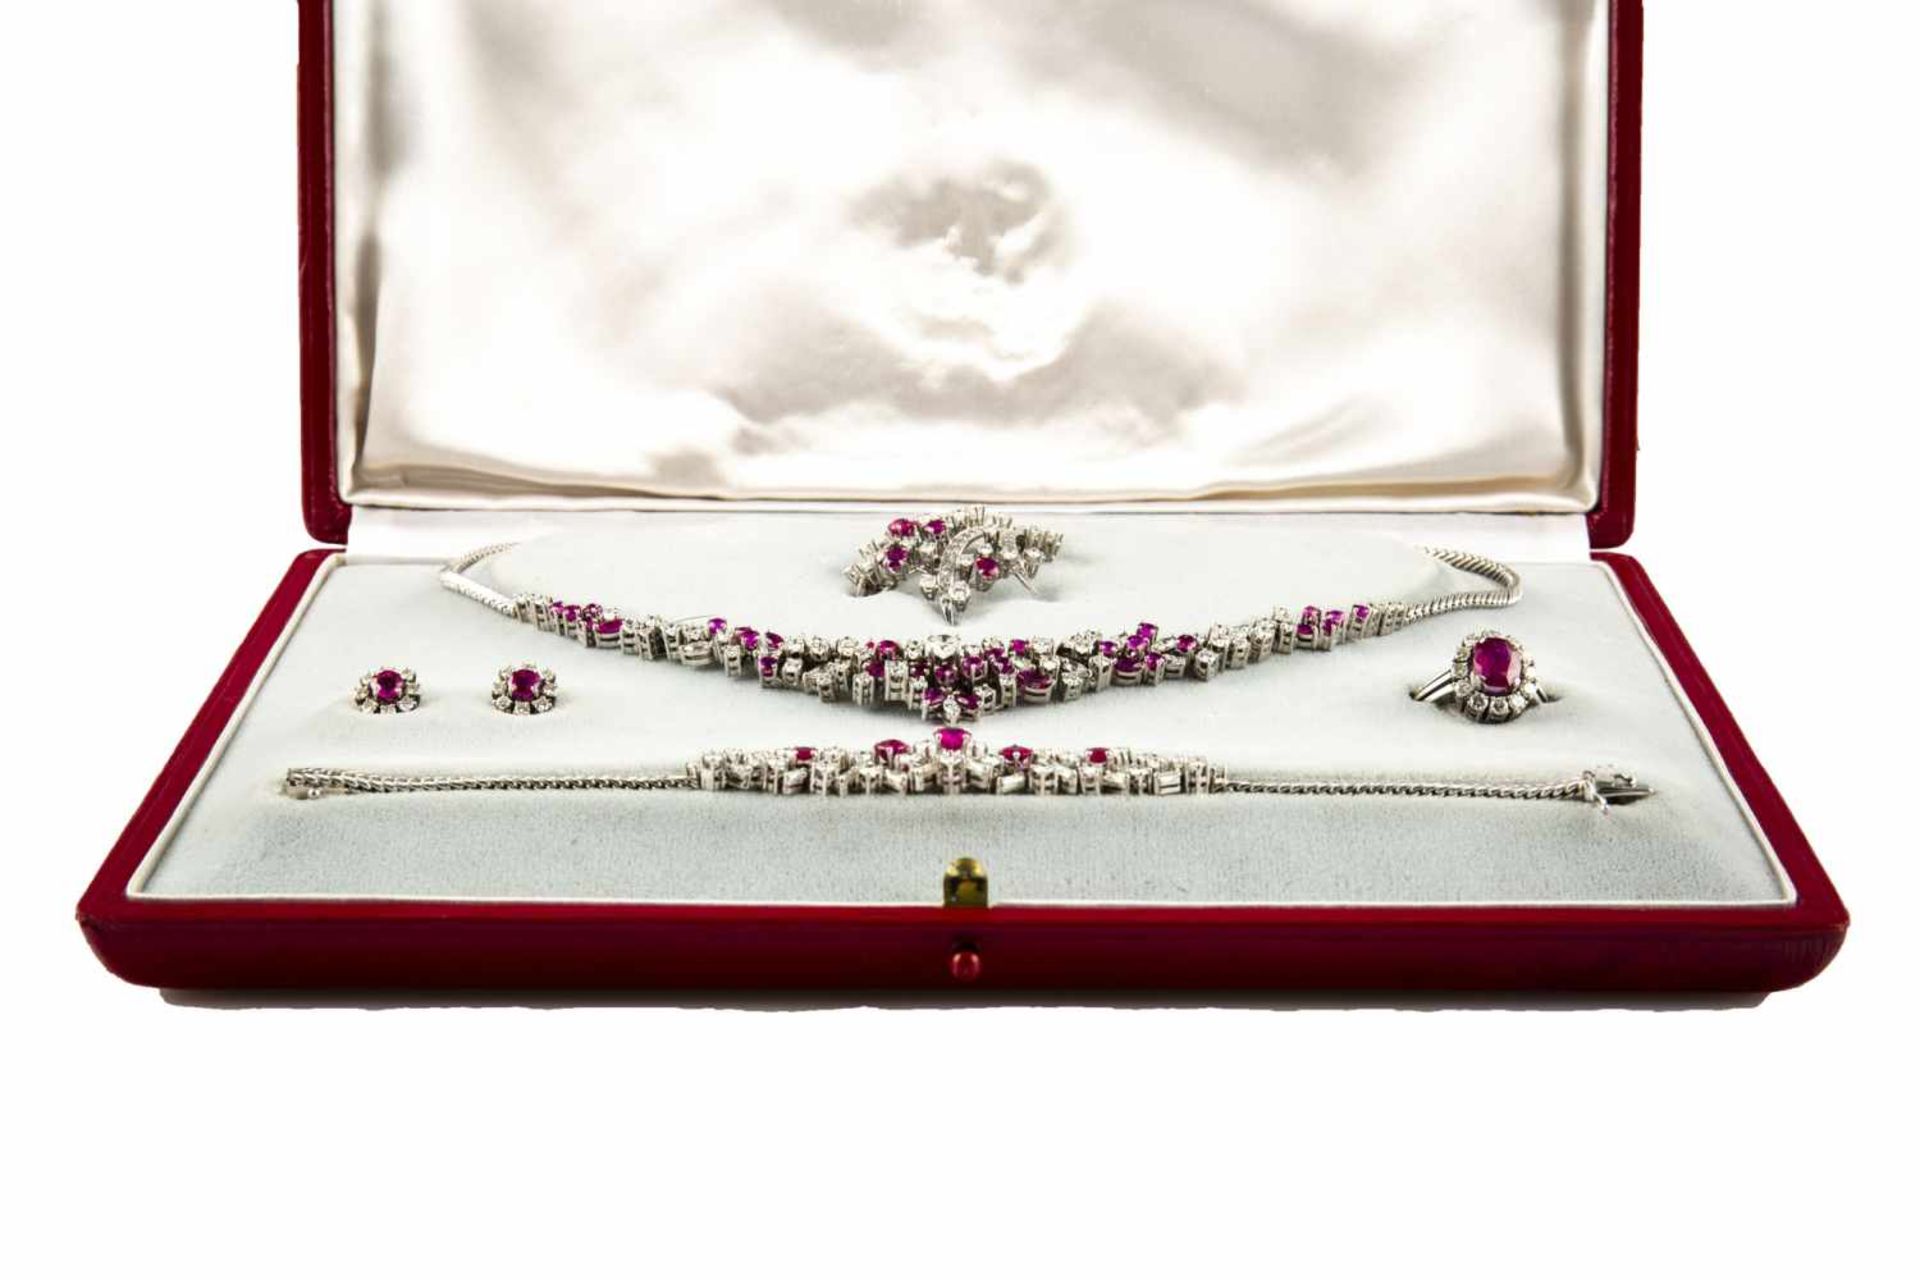 Parure with rubies and diamonds - Image 4 of 10